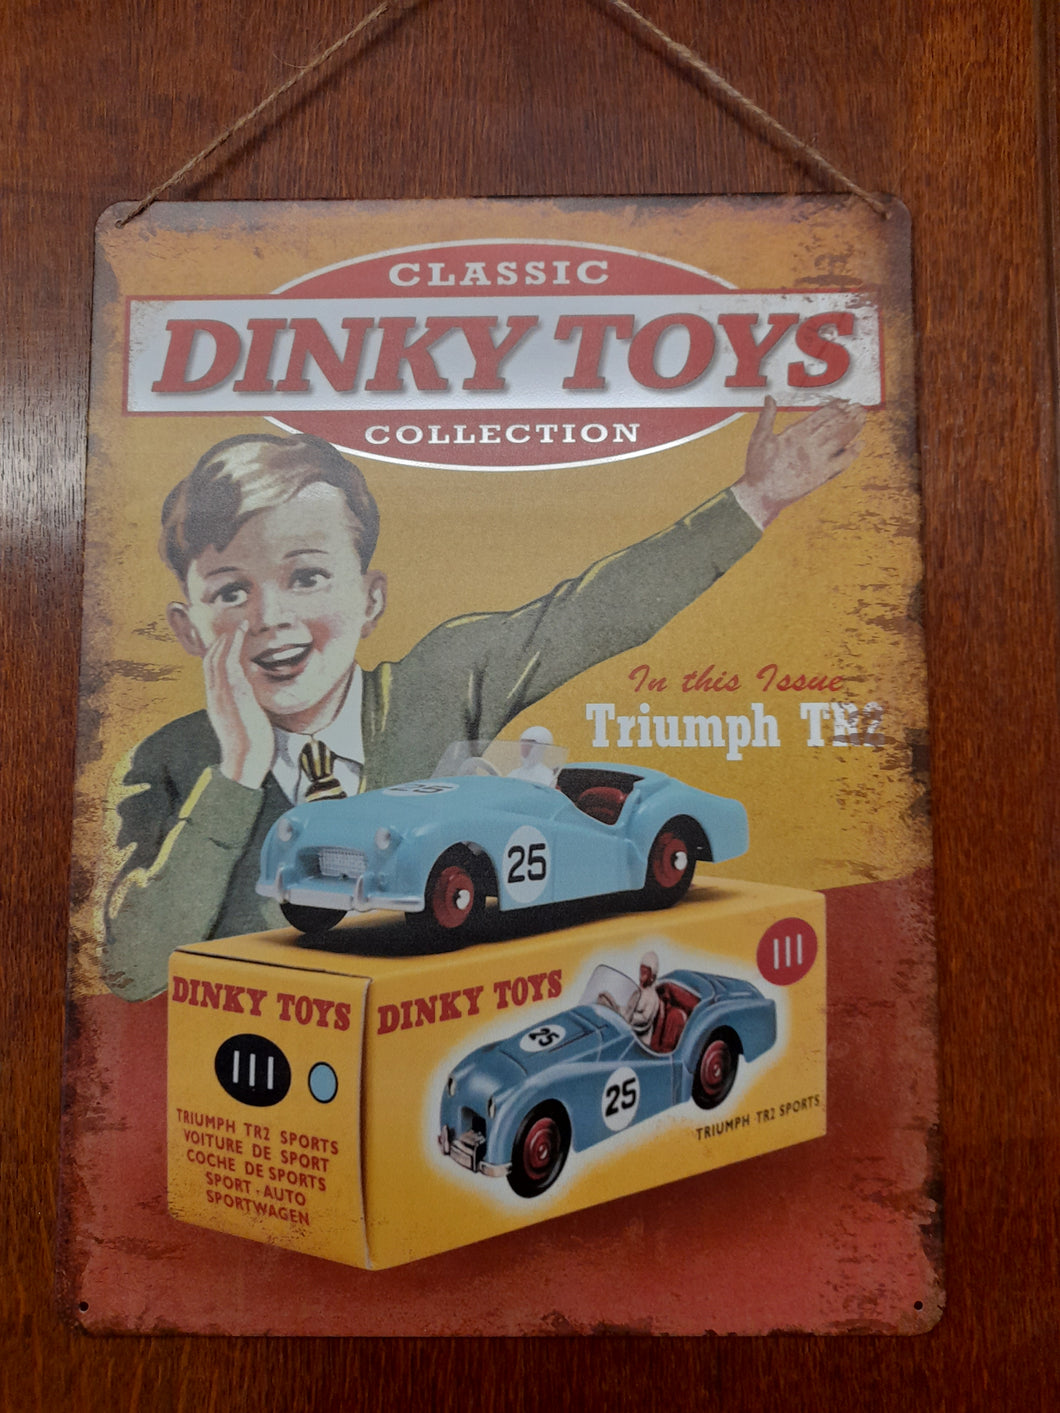 Dinky toys vintage style metal  sign